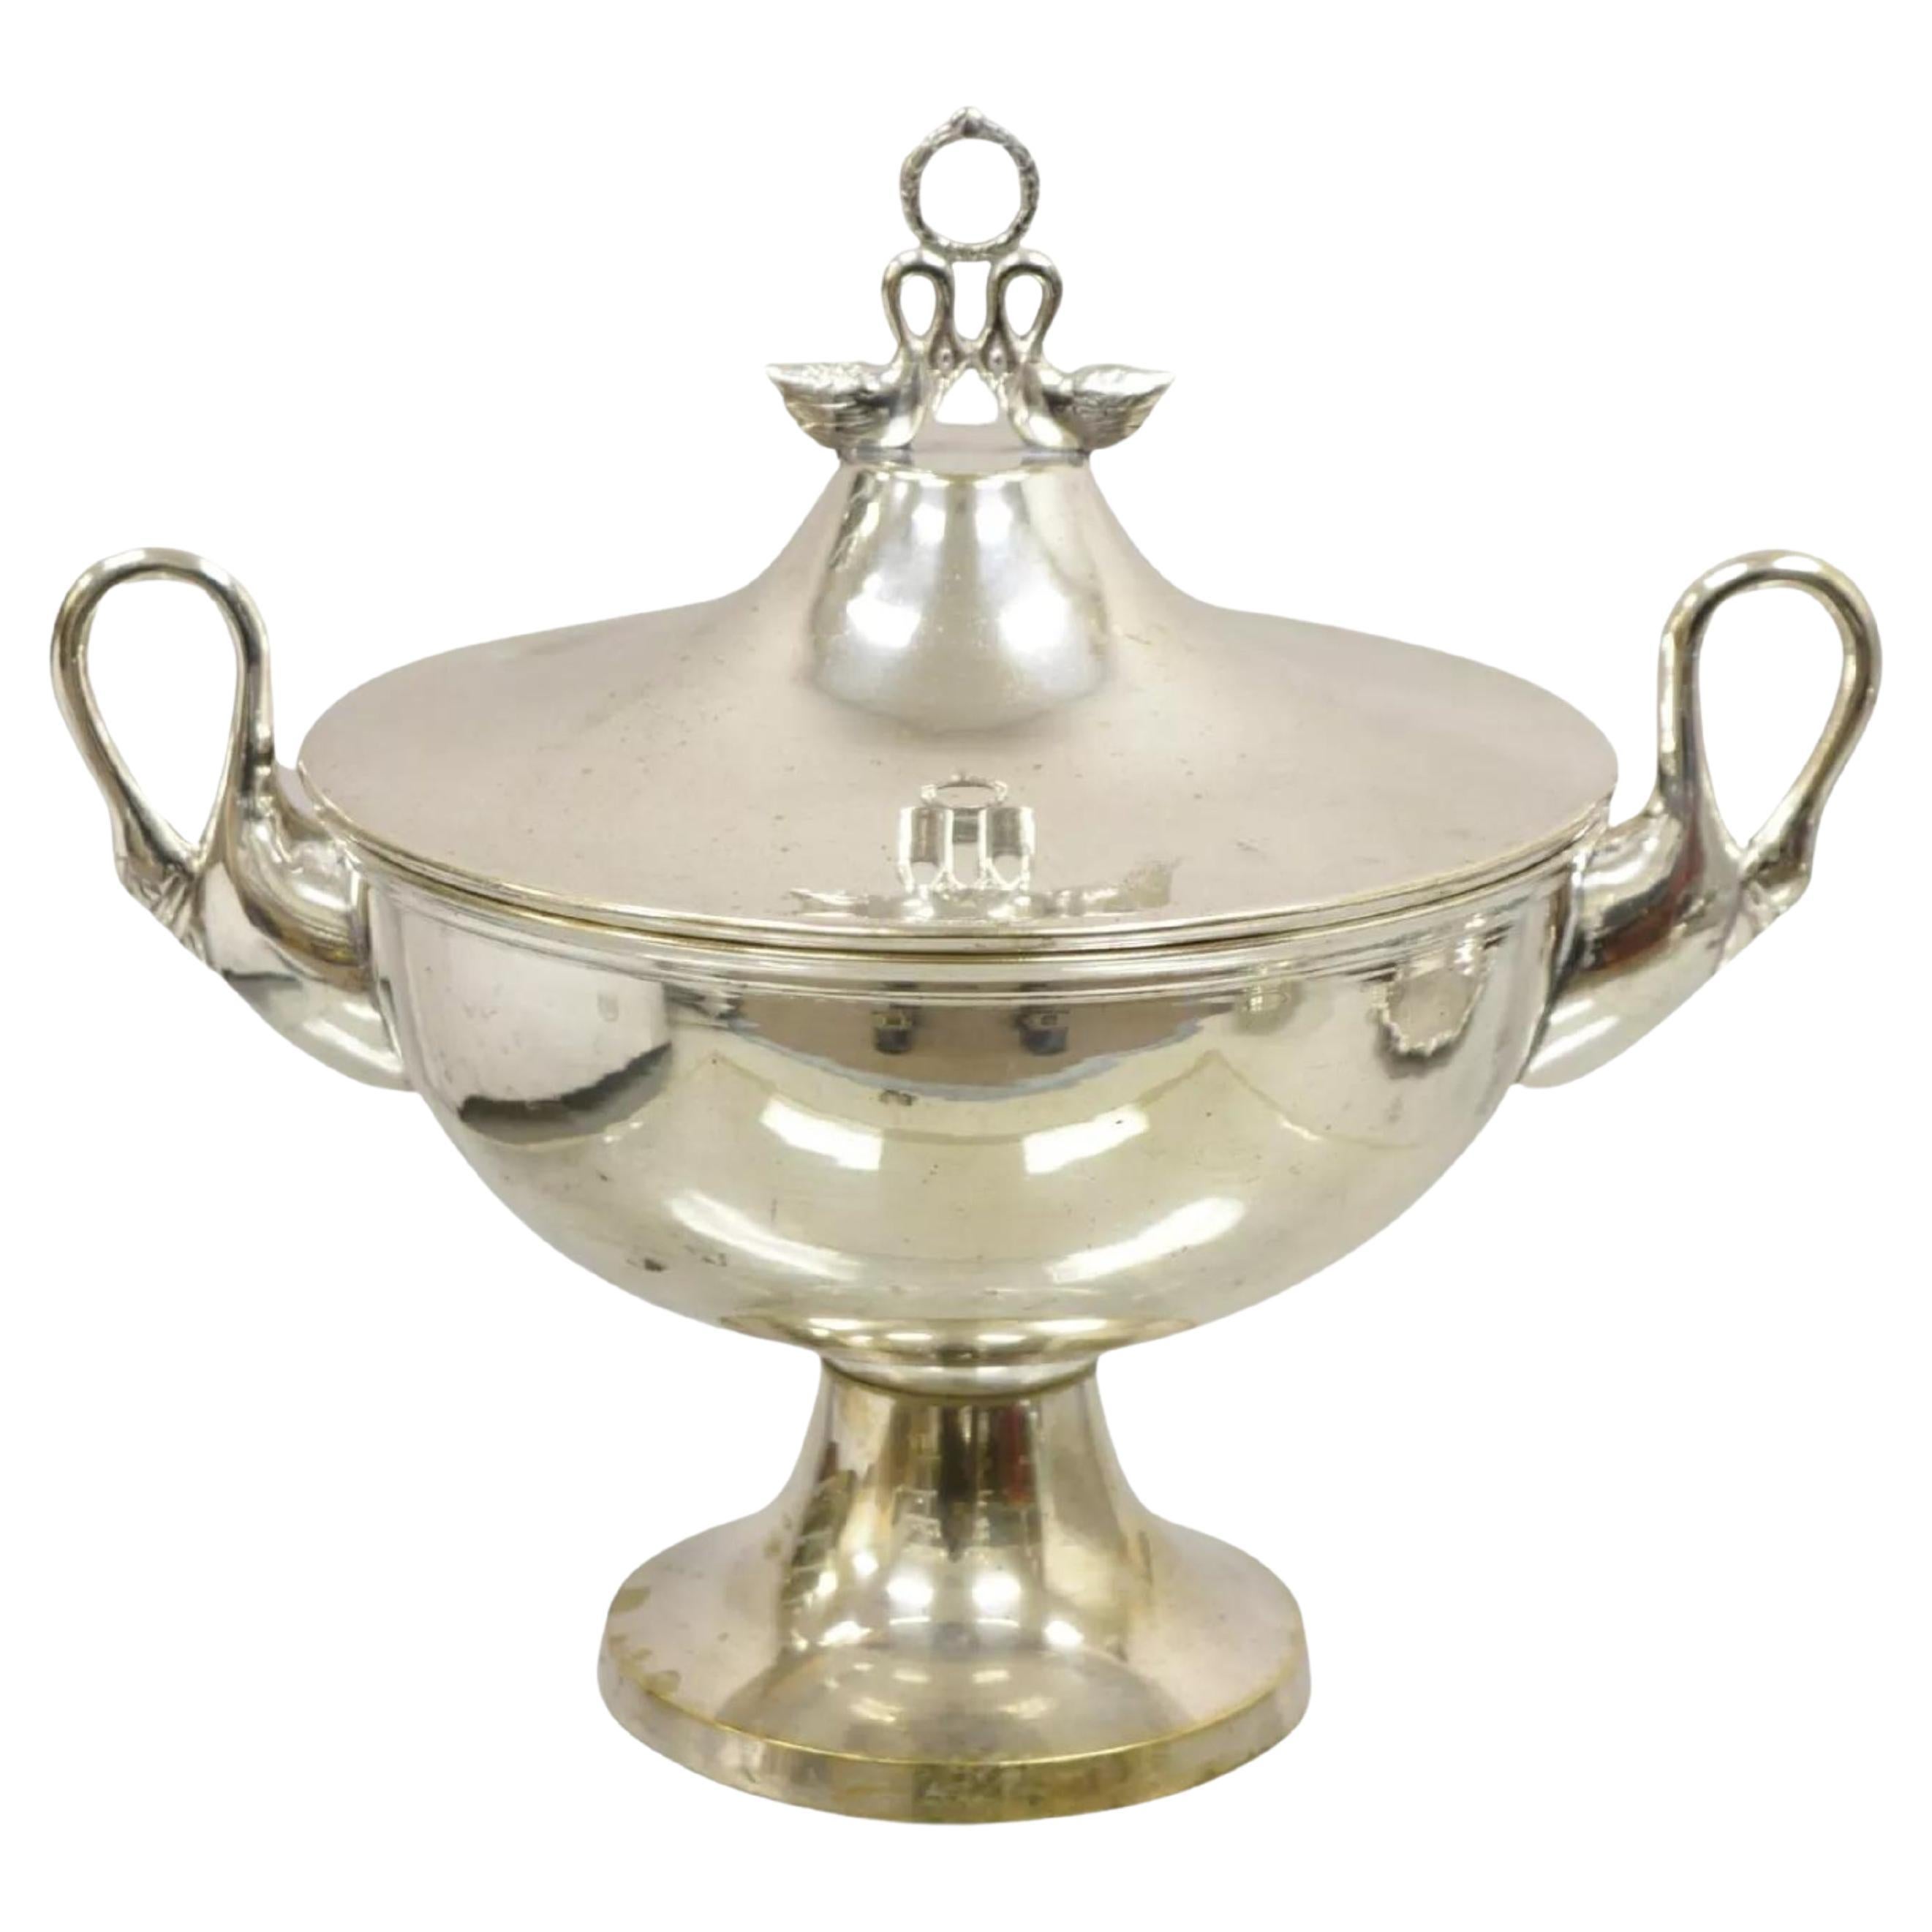 Vintage "Loving Swans" Victorian Style Silver Plated Covered Lidded Soup Tureen.